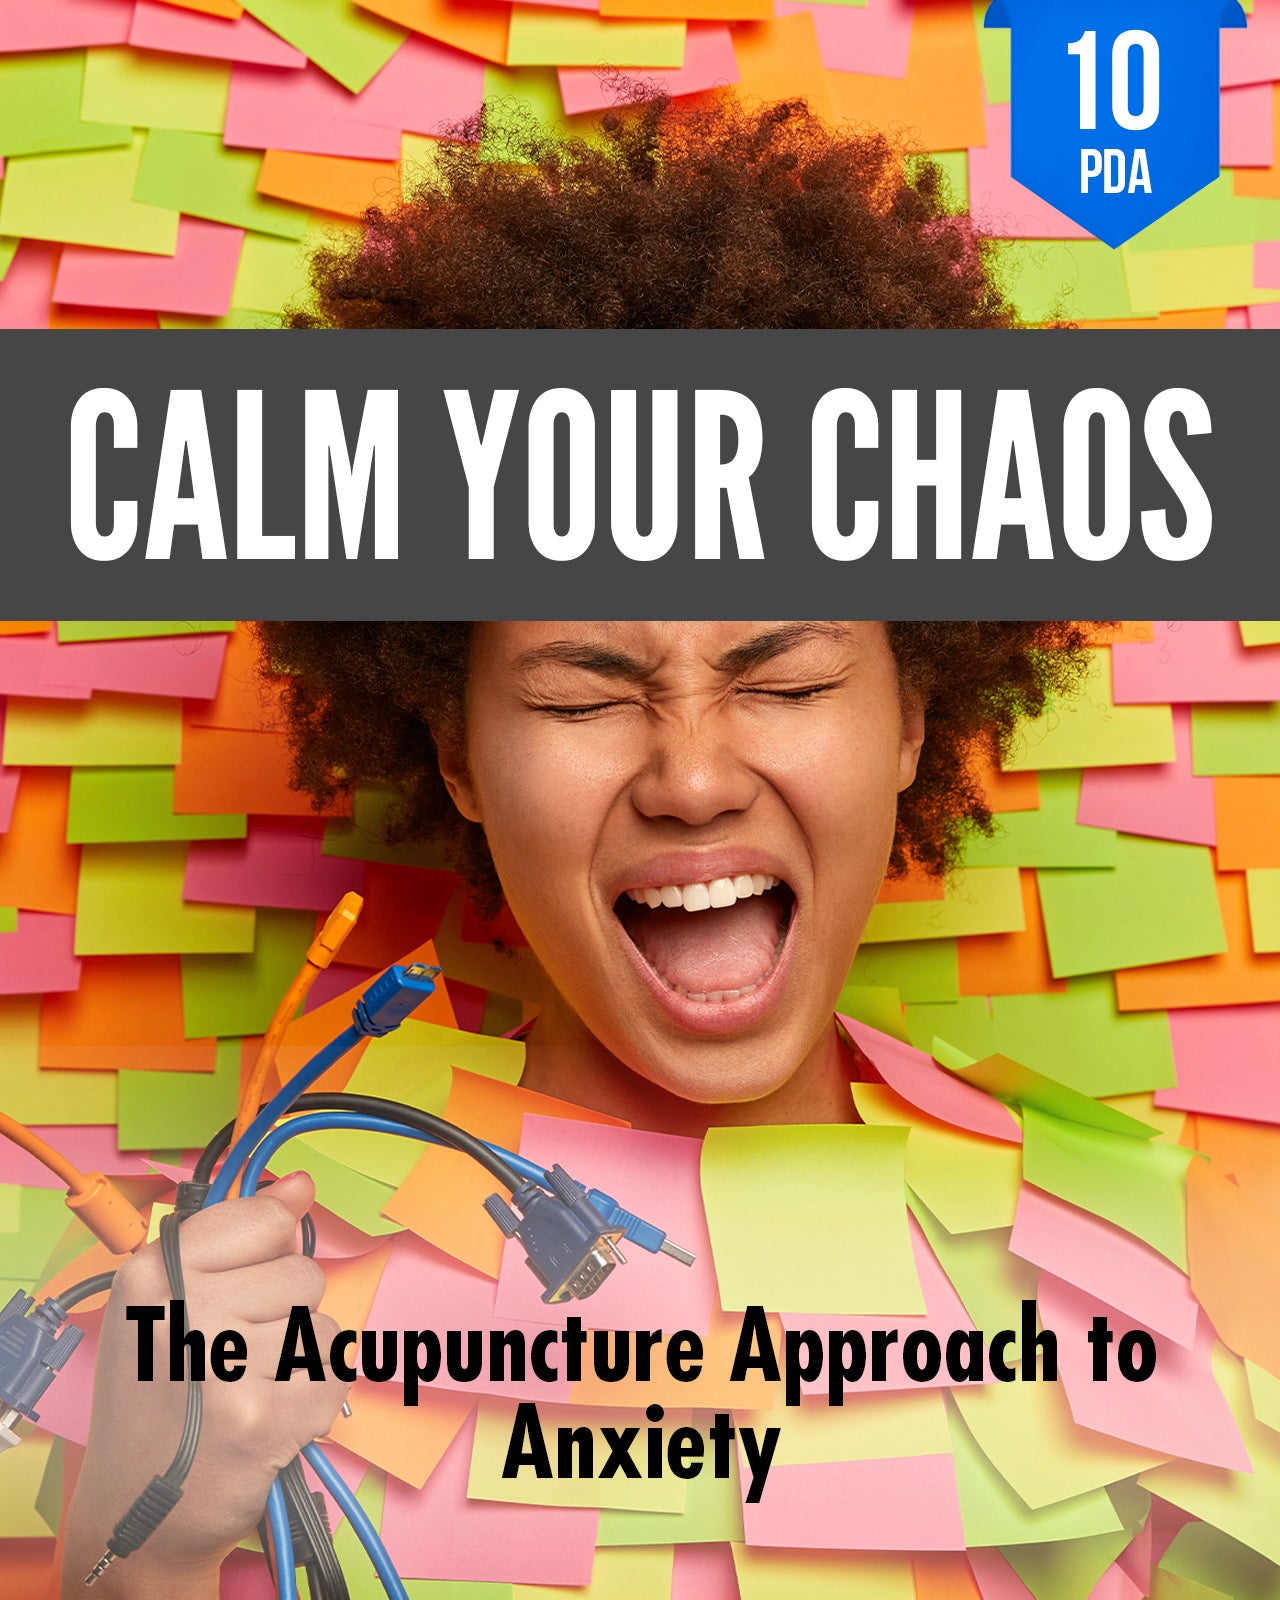 Calm The Chaos: The Acupuncture Approach to Tension Relief - NCCAOM Continuing Education, AOM, 10 PDA ACEU Masters continuing education provider